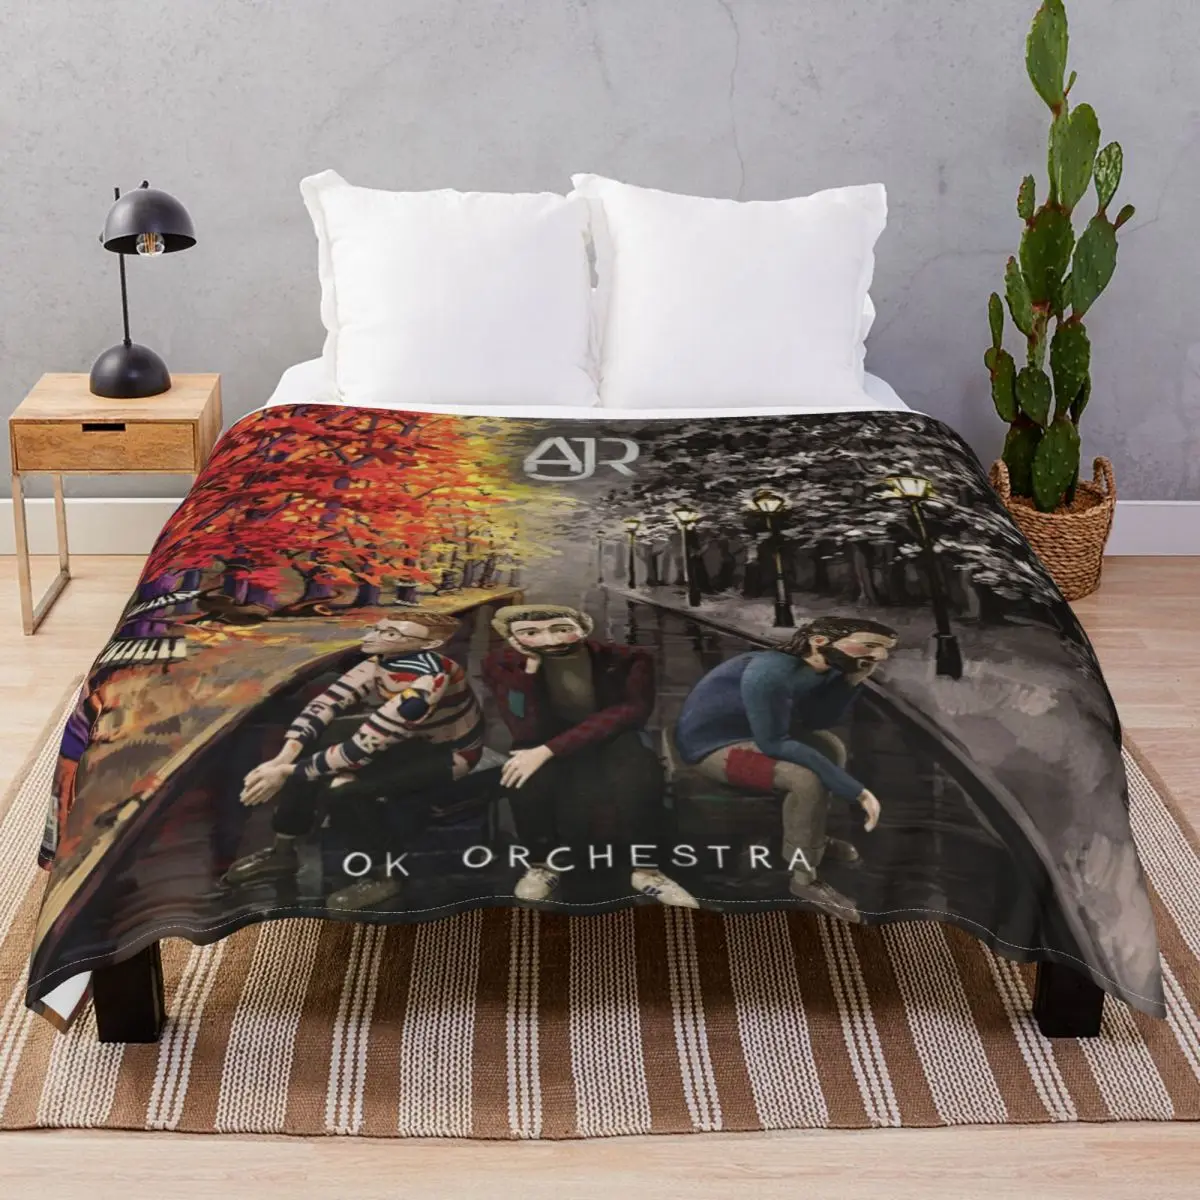 AJR Ok Orchestra Blankets Fleece Spring/Autumn Breathable Unisex Throw Blanket for Bed Home Couch Travel Cinema